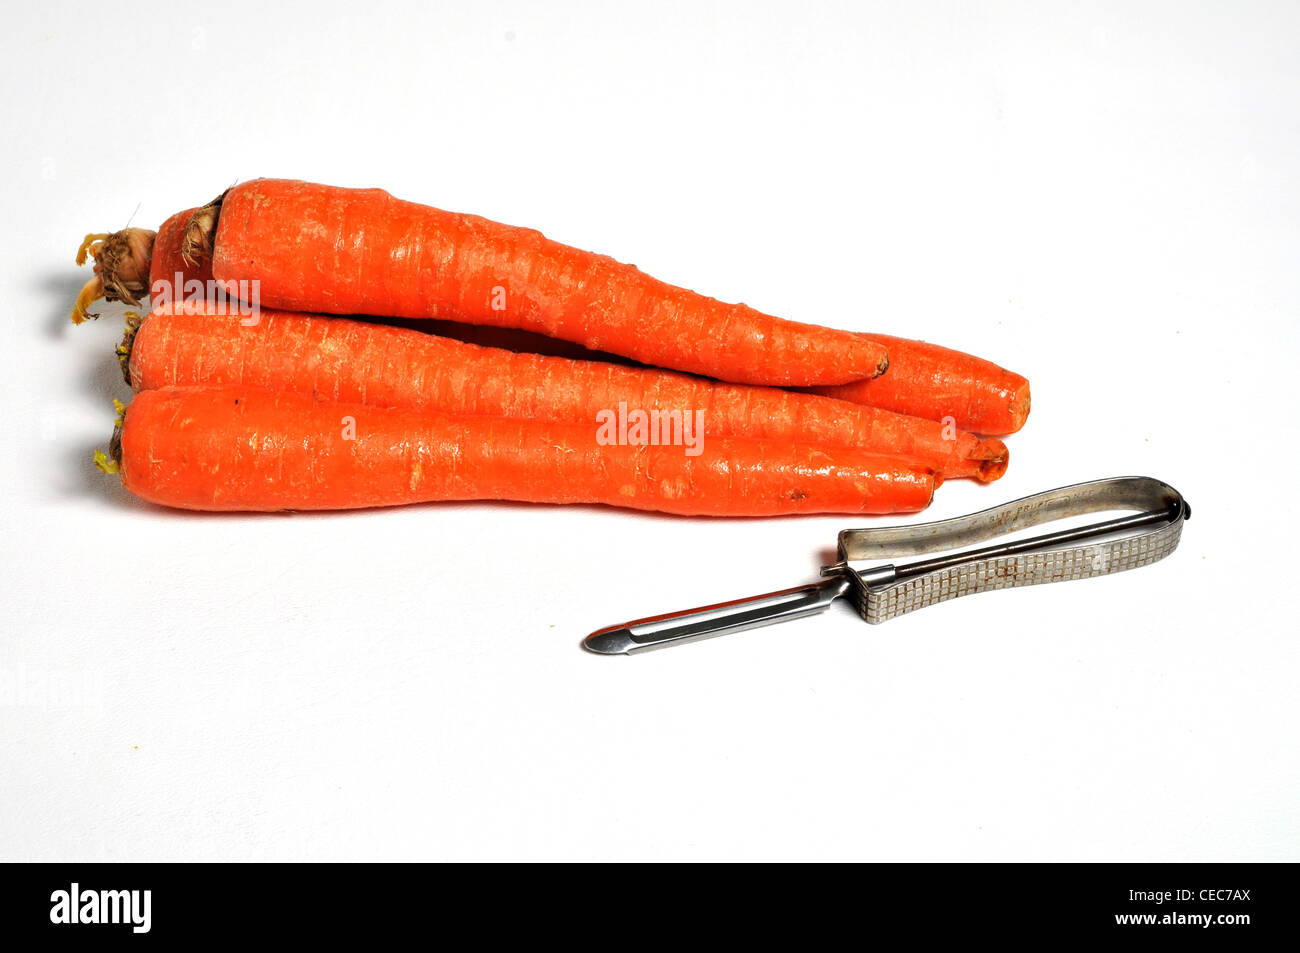 https://c8.alamy.com/comp/CEC7AX/carrots-and-a-potato-peeler-are-laying-on-a-plain-white-background-CEC7AX.jpg